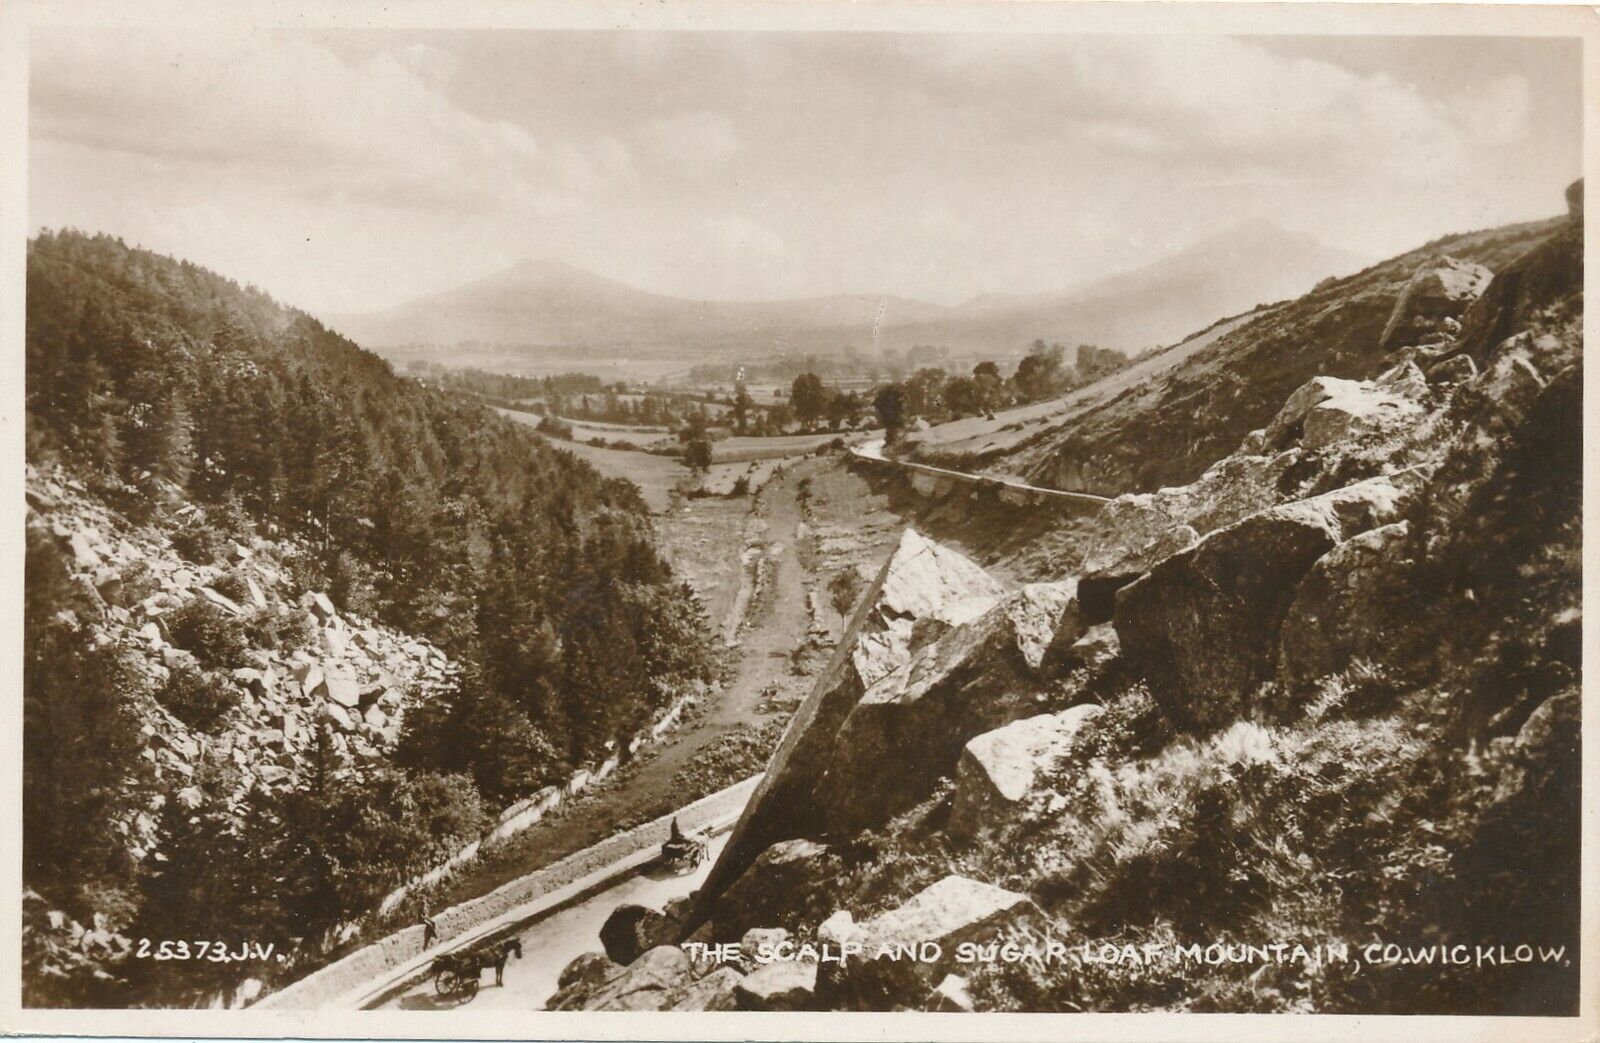 WICKLOW – The Scalp and Sugar Loaf Mountain Real Photo Postcard rppc – Ireland